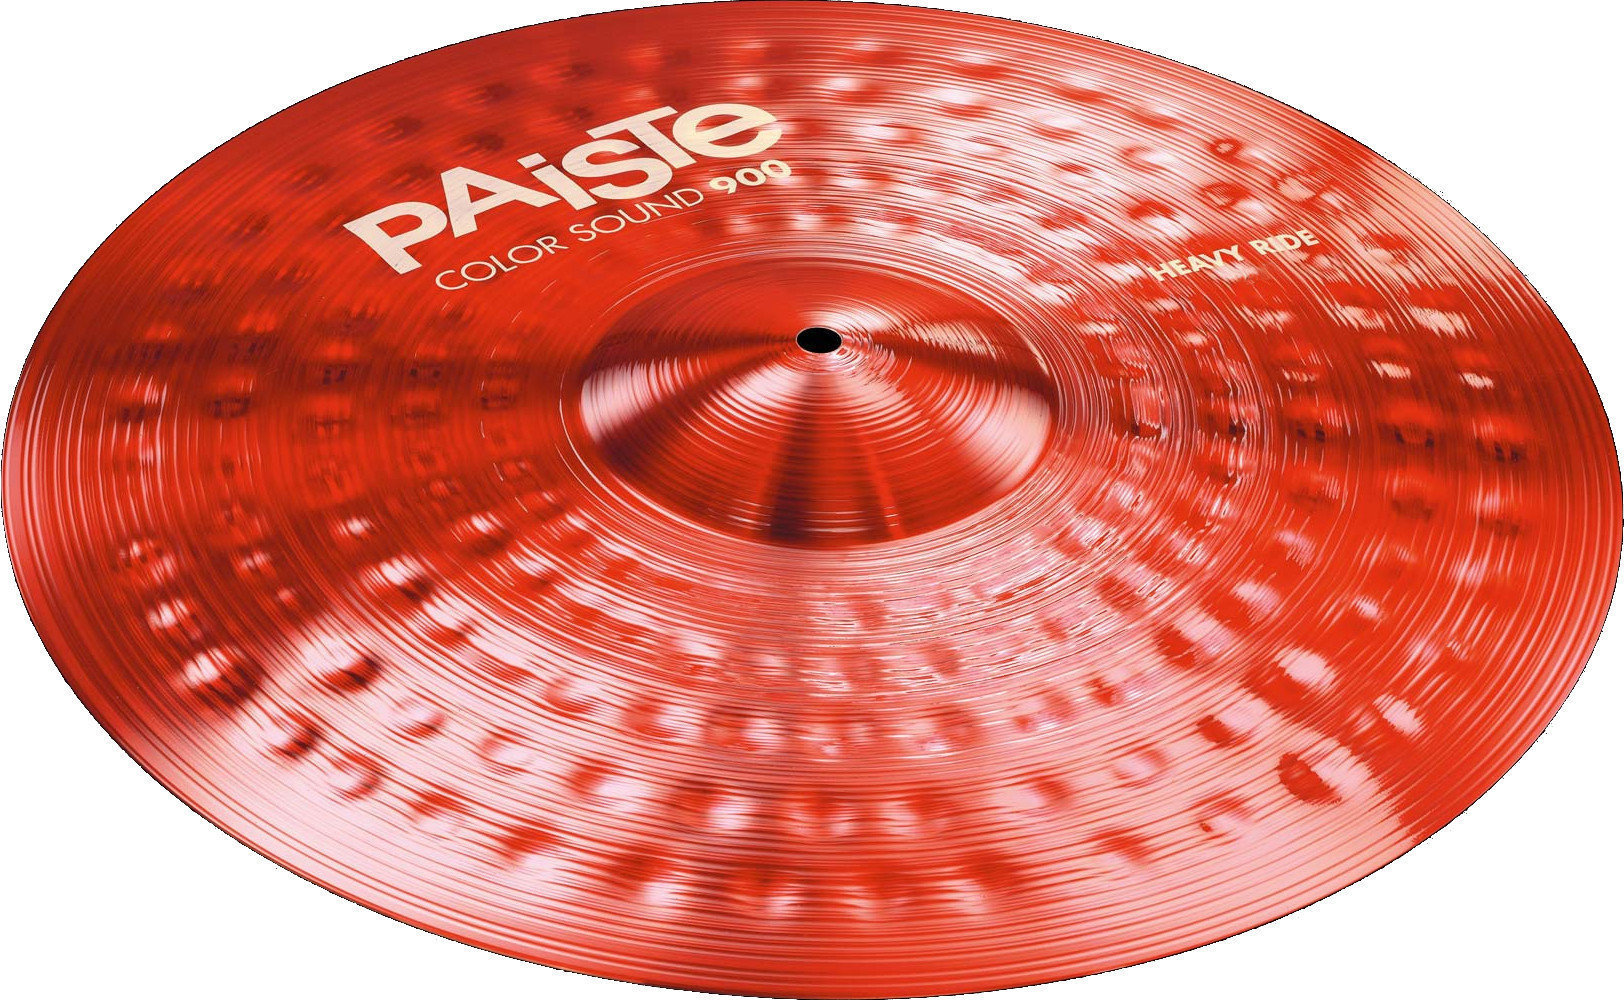 Ride Cymbal Paiste Color Sound 900  Heavy Ride Cymbal 22" Rød